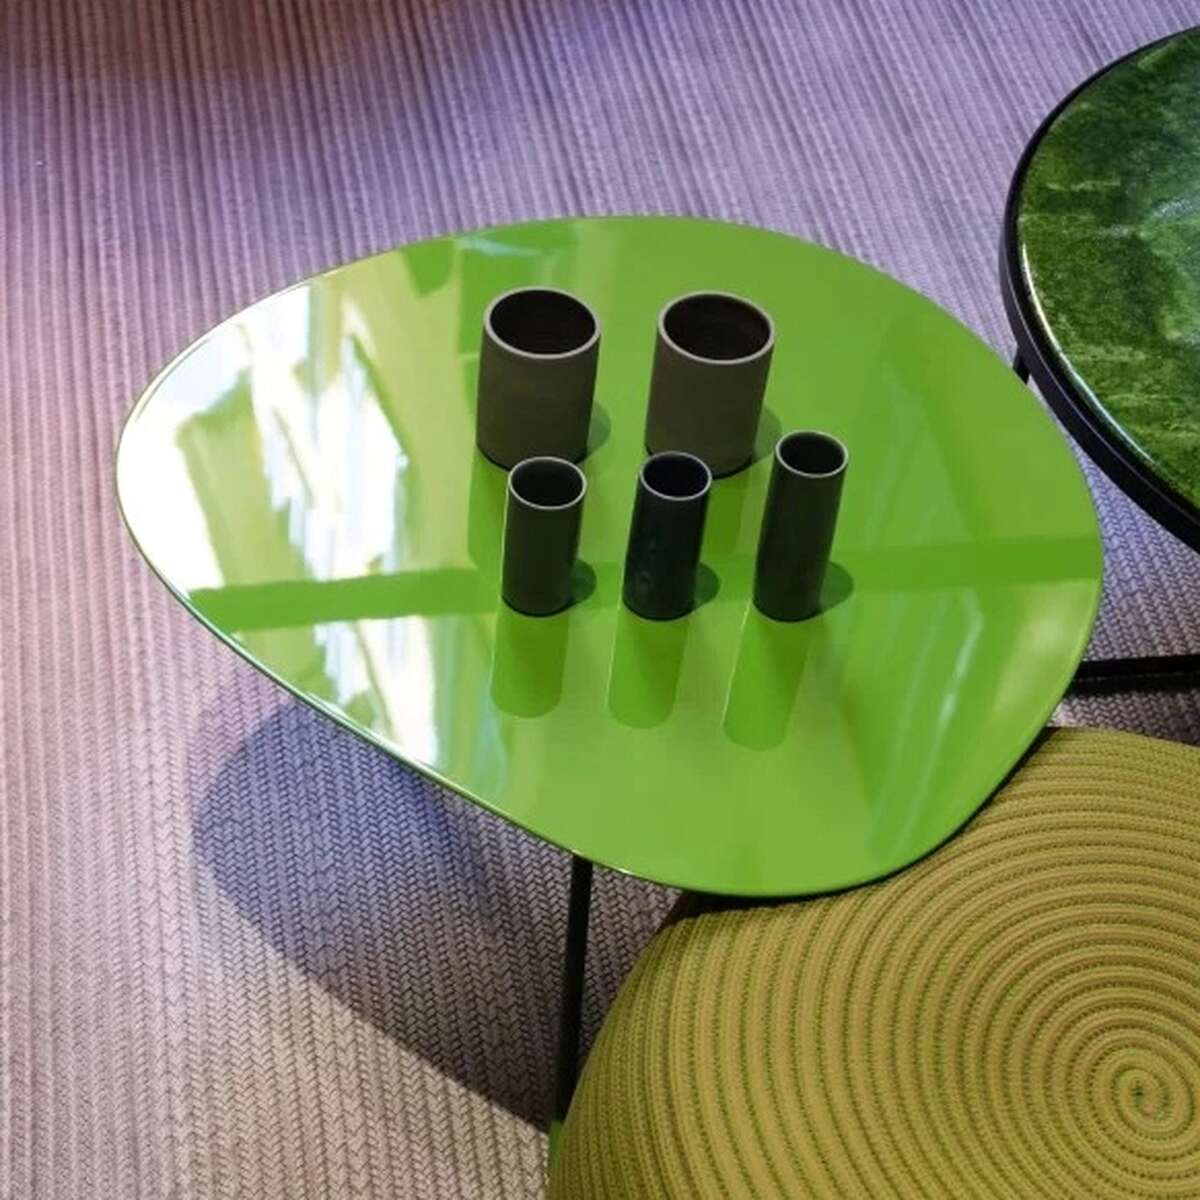 Paola lenti Lever Table ambient 2 The Modern Garden Company